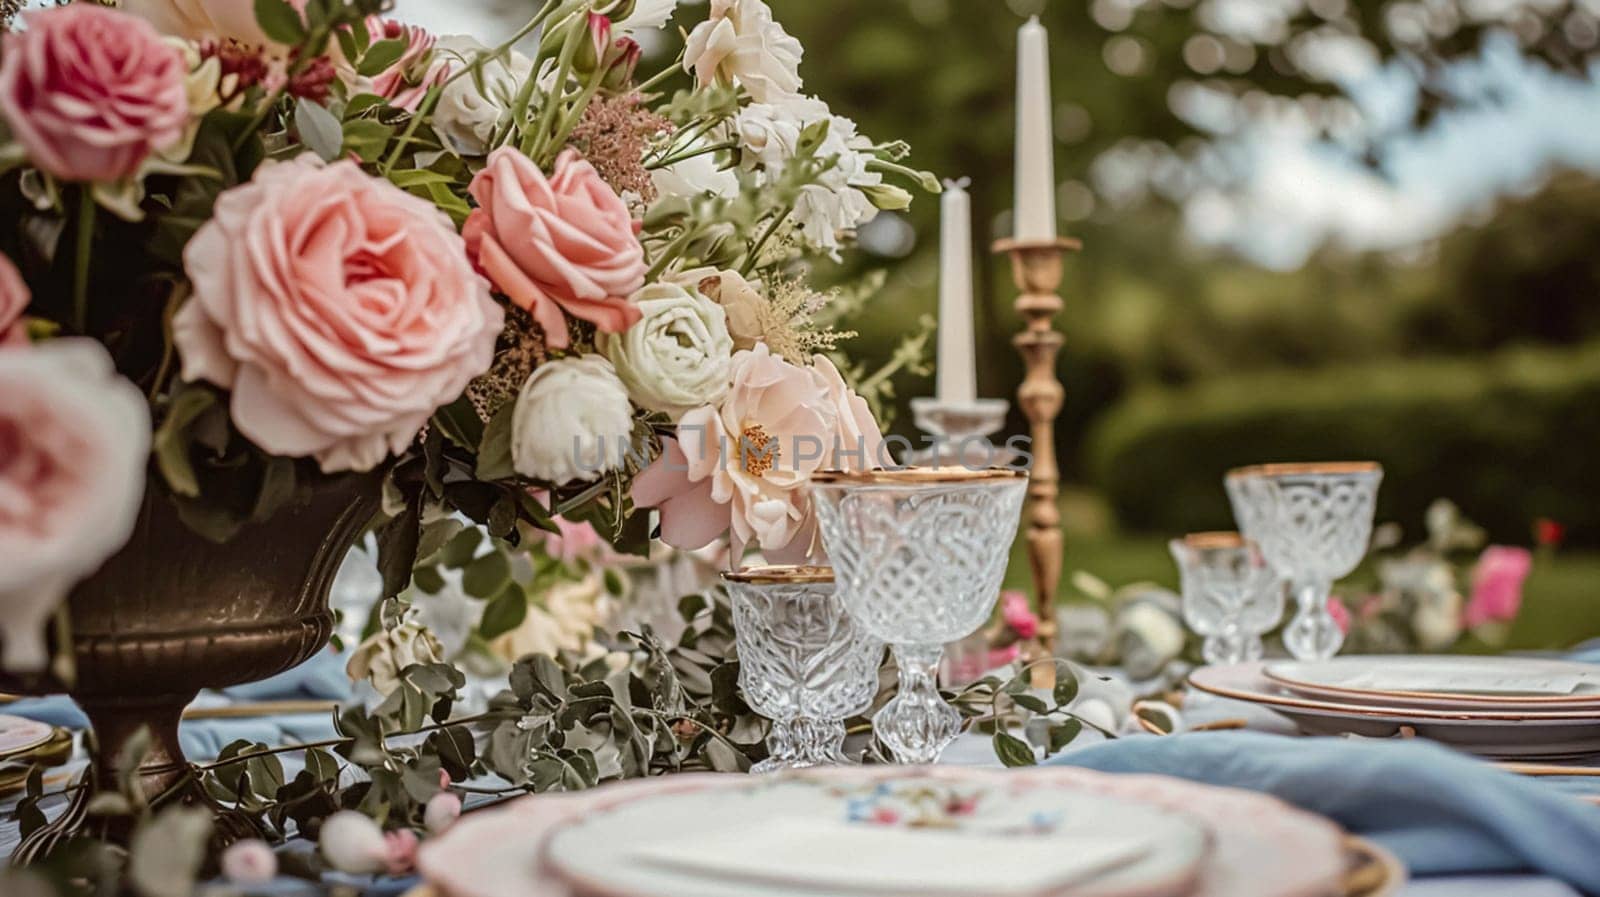 Beautifully set table for a garden party, adorned tablescape with vibrant floral arrangements, under the shade of blossoming rose bushes, inviting a sense of elegance and natural charm